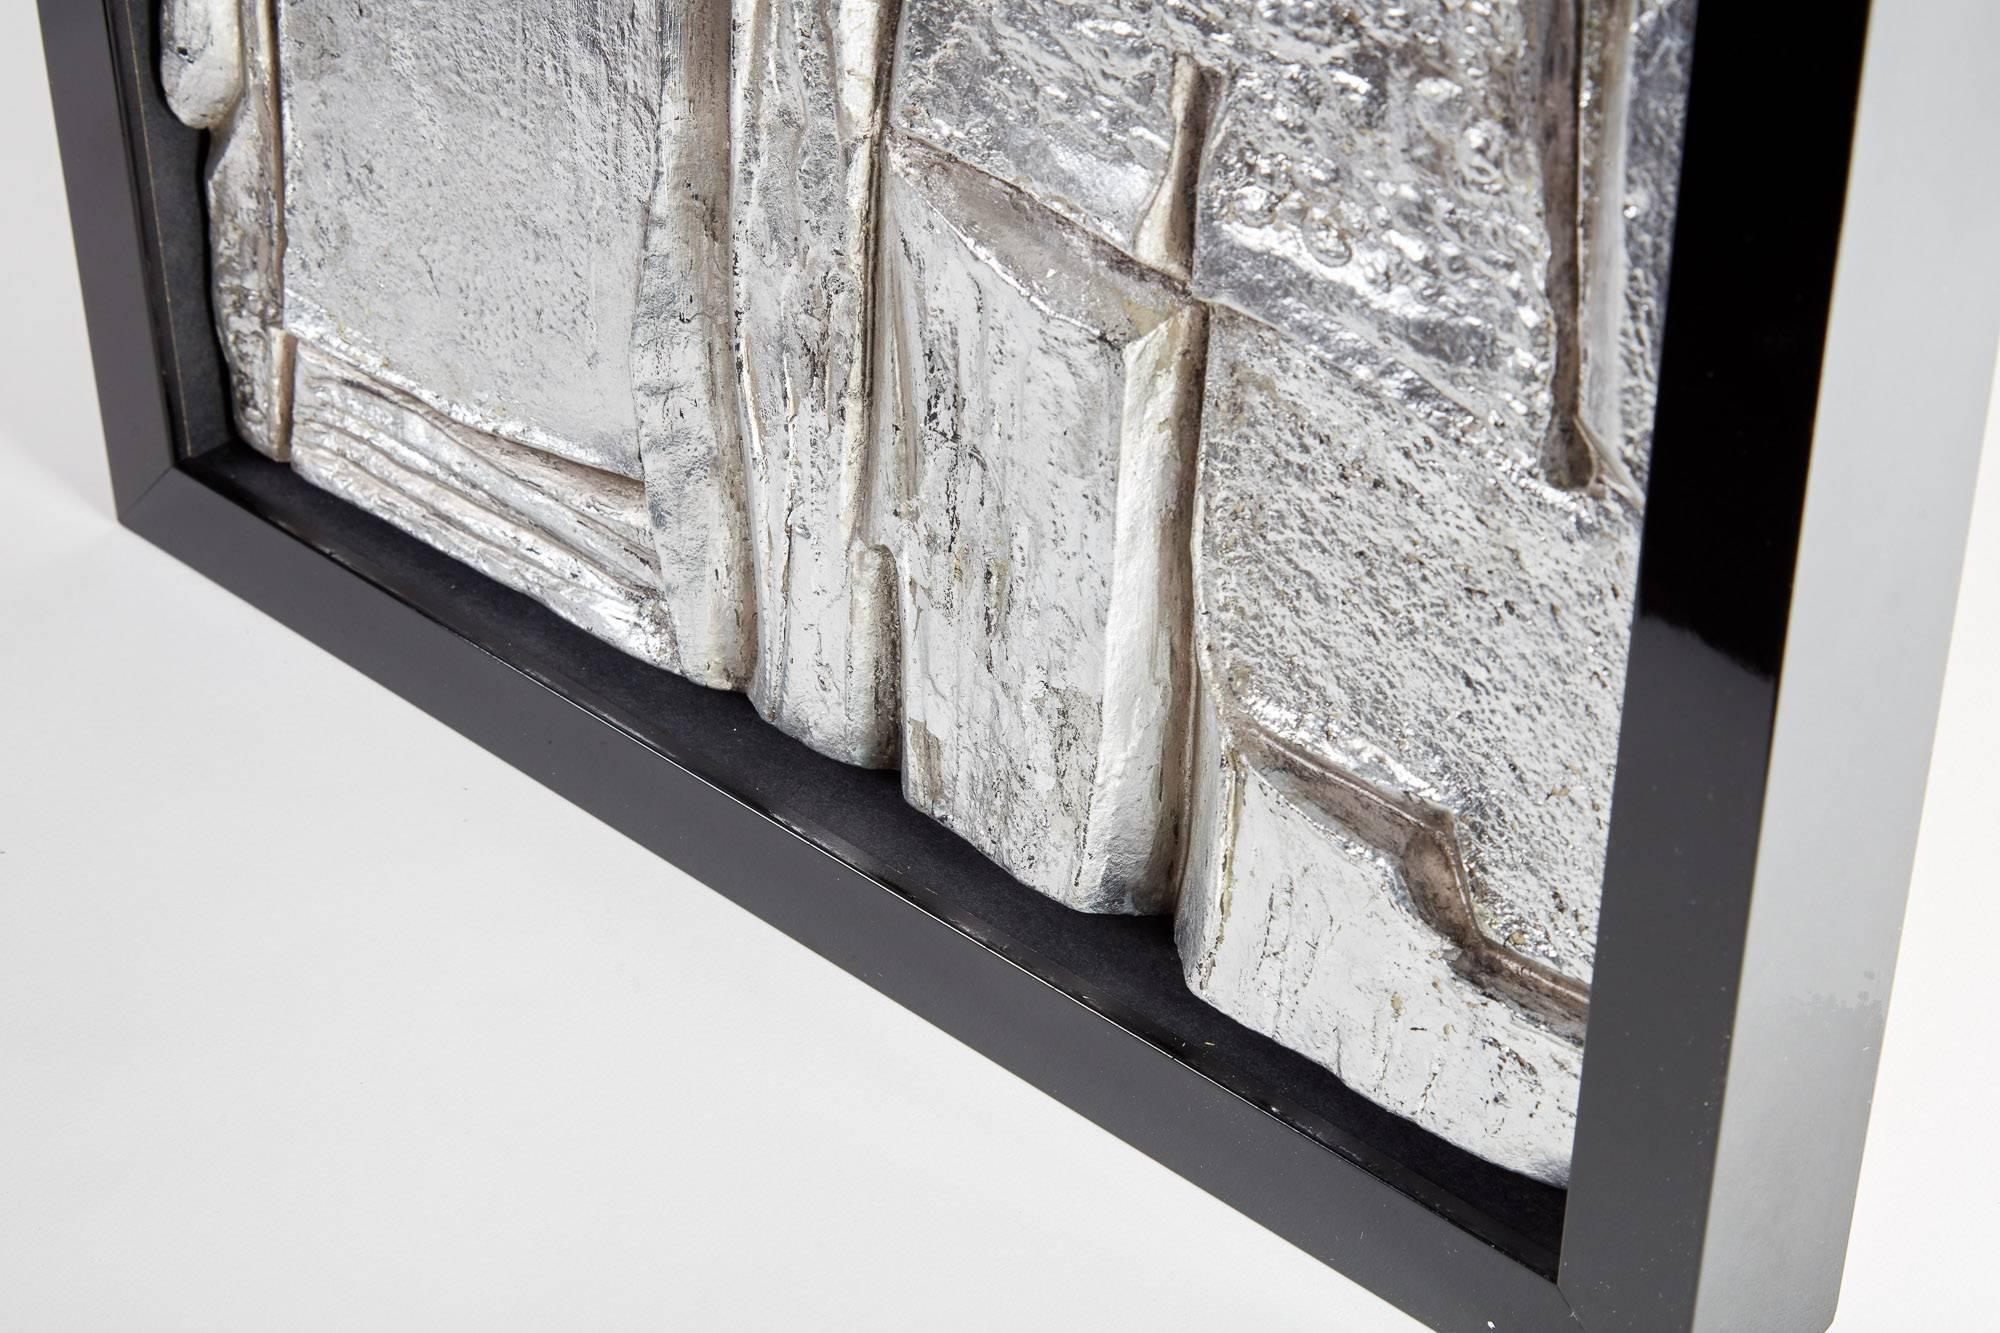 Mid-20th Century French Framed Abstract Plaster/Silver Leaf Sculpture
This three-dimensional, heavily textured sculpture is crafted from plaster and with a silver leaf finish. Signed by artist and framed in a heavy black lacquer frame
Found in